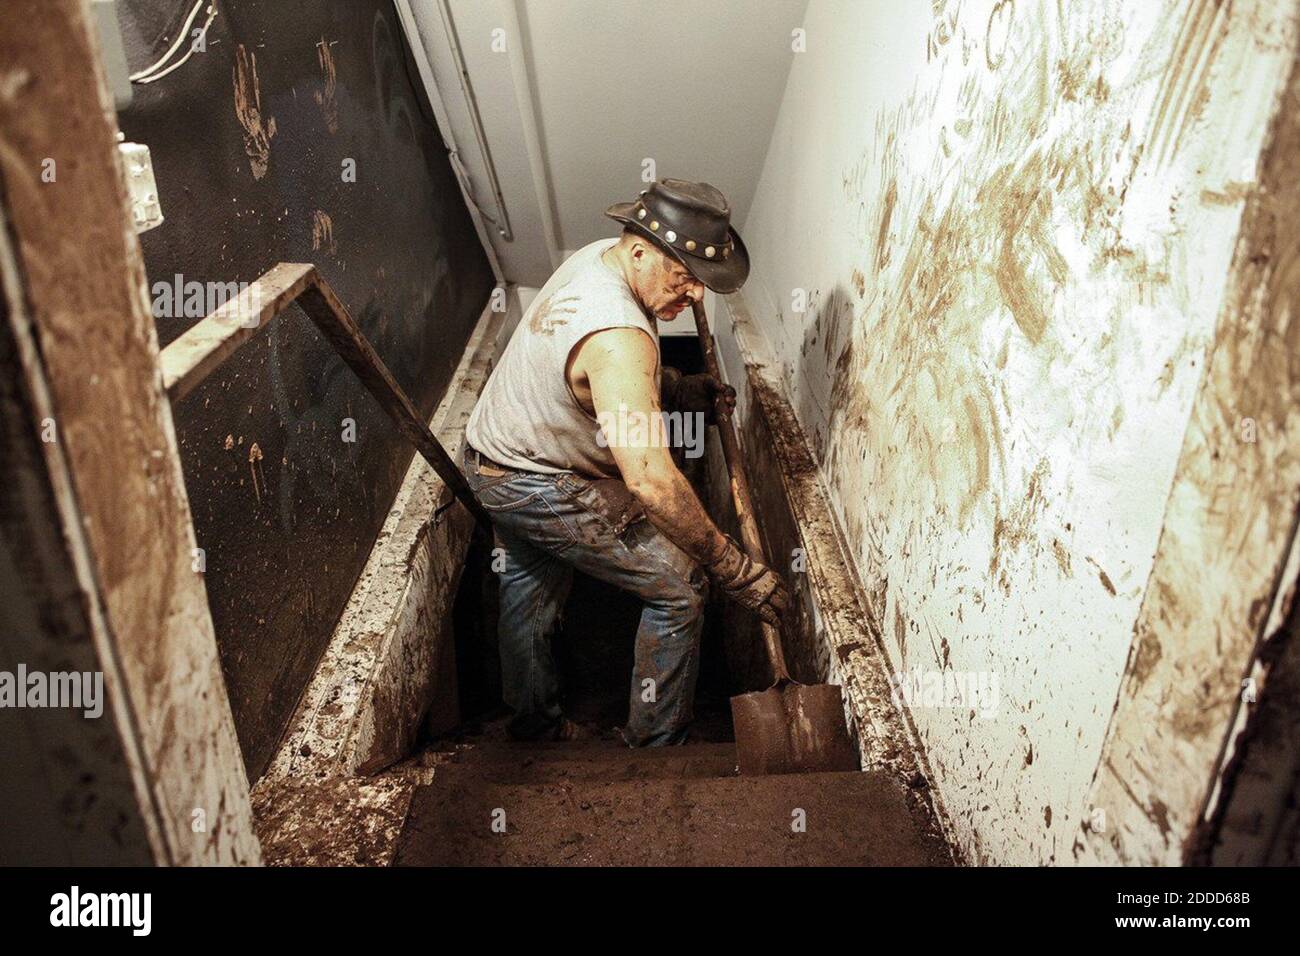 NO FILM, NO VIDEO, NO TV, NO DOCUMENTARY - Volunteer J Gorman cleans the stairs to the basement in a building on Canyon Road in Manitou Springs, Colorado, Sunday, August 11, 2013. Photo by Junfu Han/Colorado Springs Gazette/MCT/ABACAPRESS.COM Stock Photo